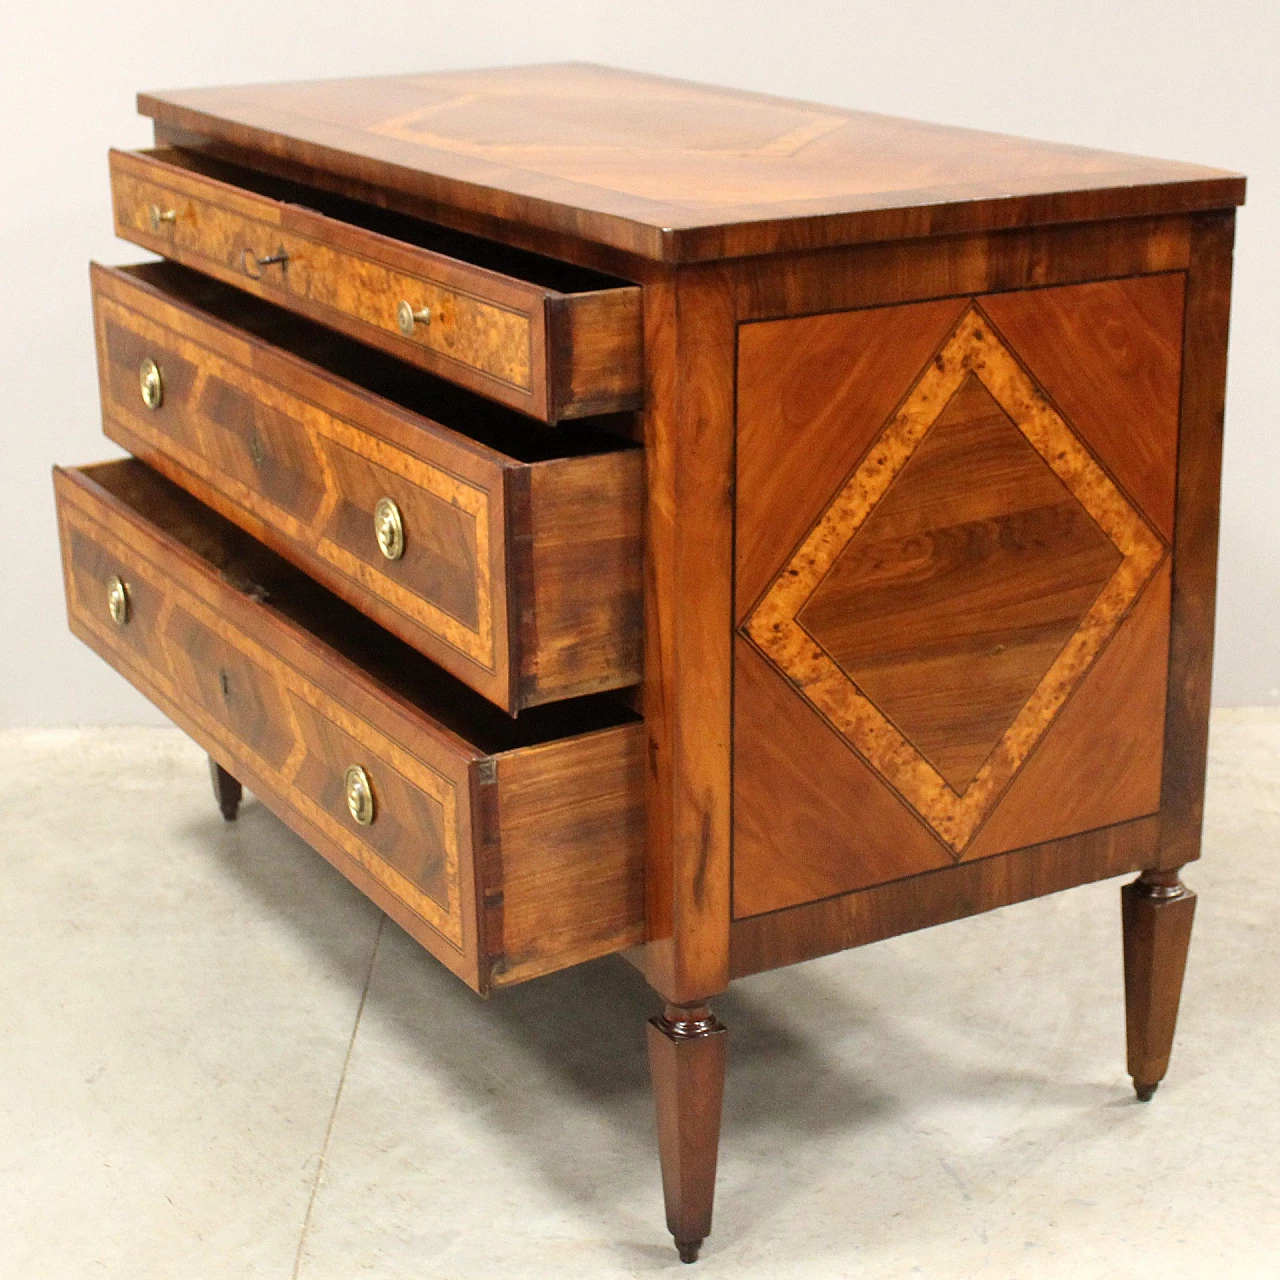 Emilian Louis XVI walnut and cherry commode with inlays, 18th century 3